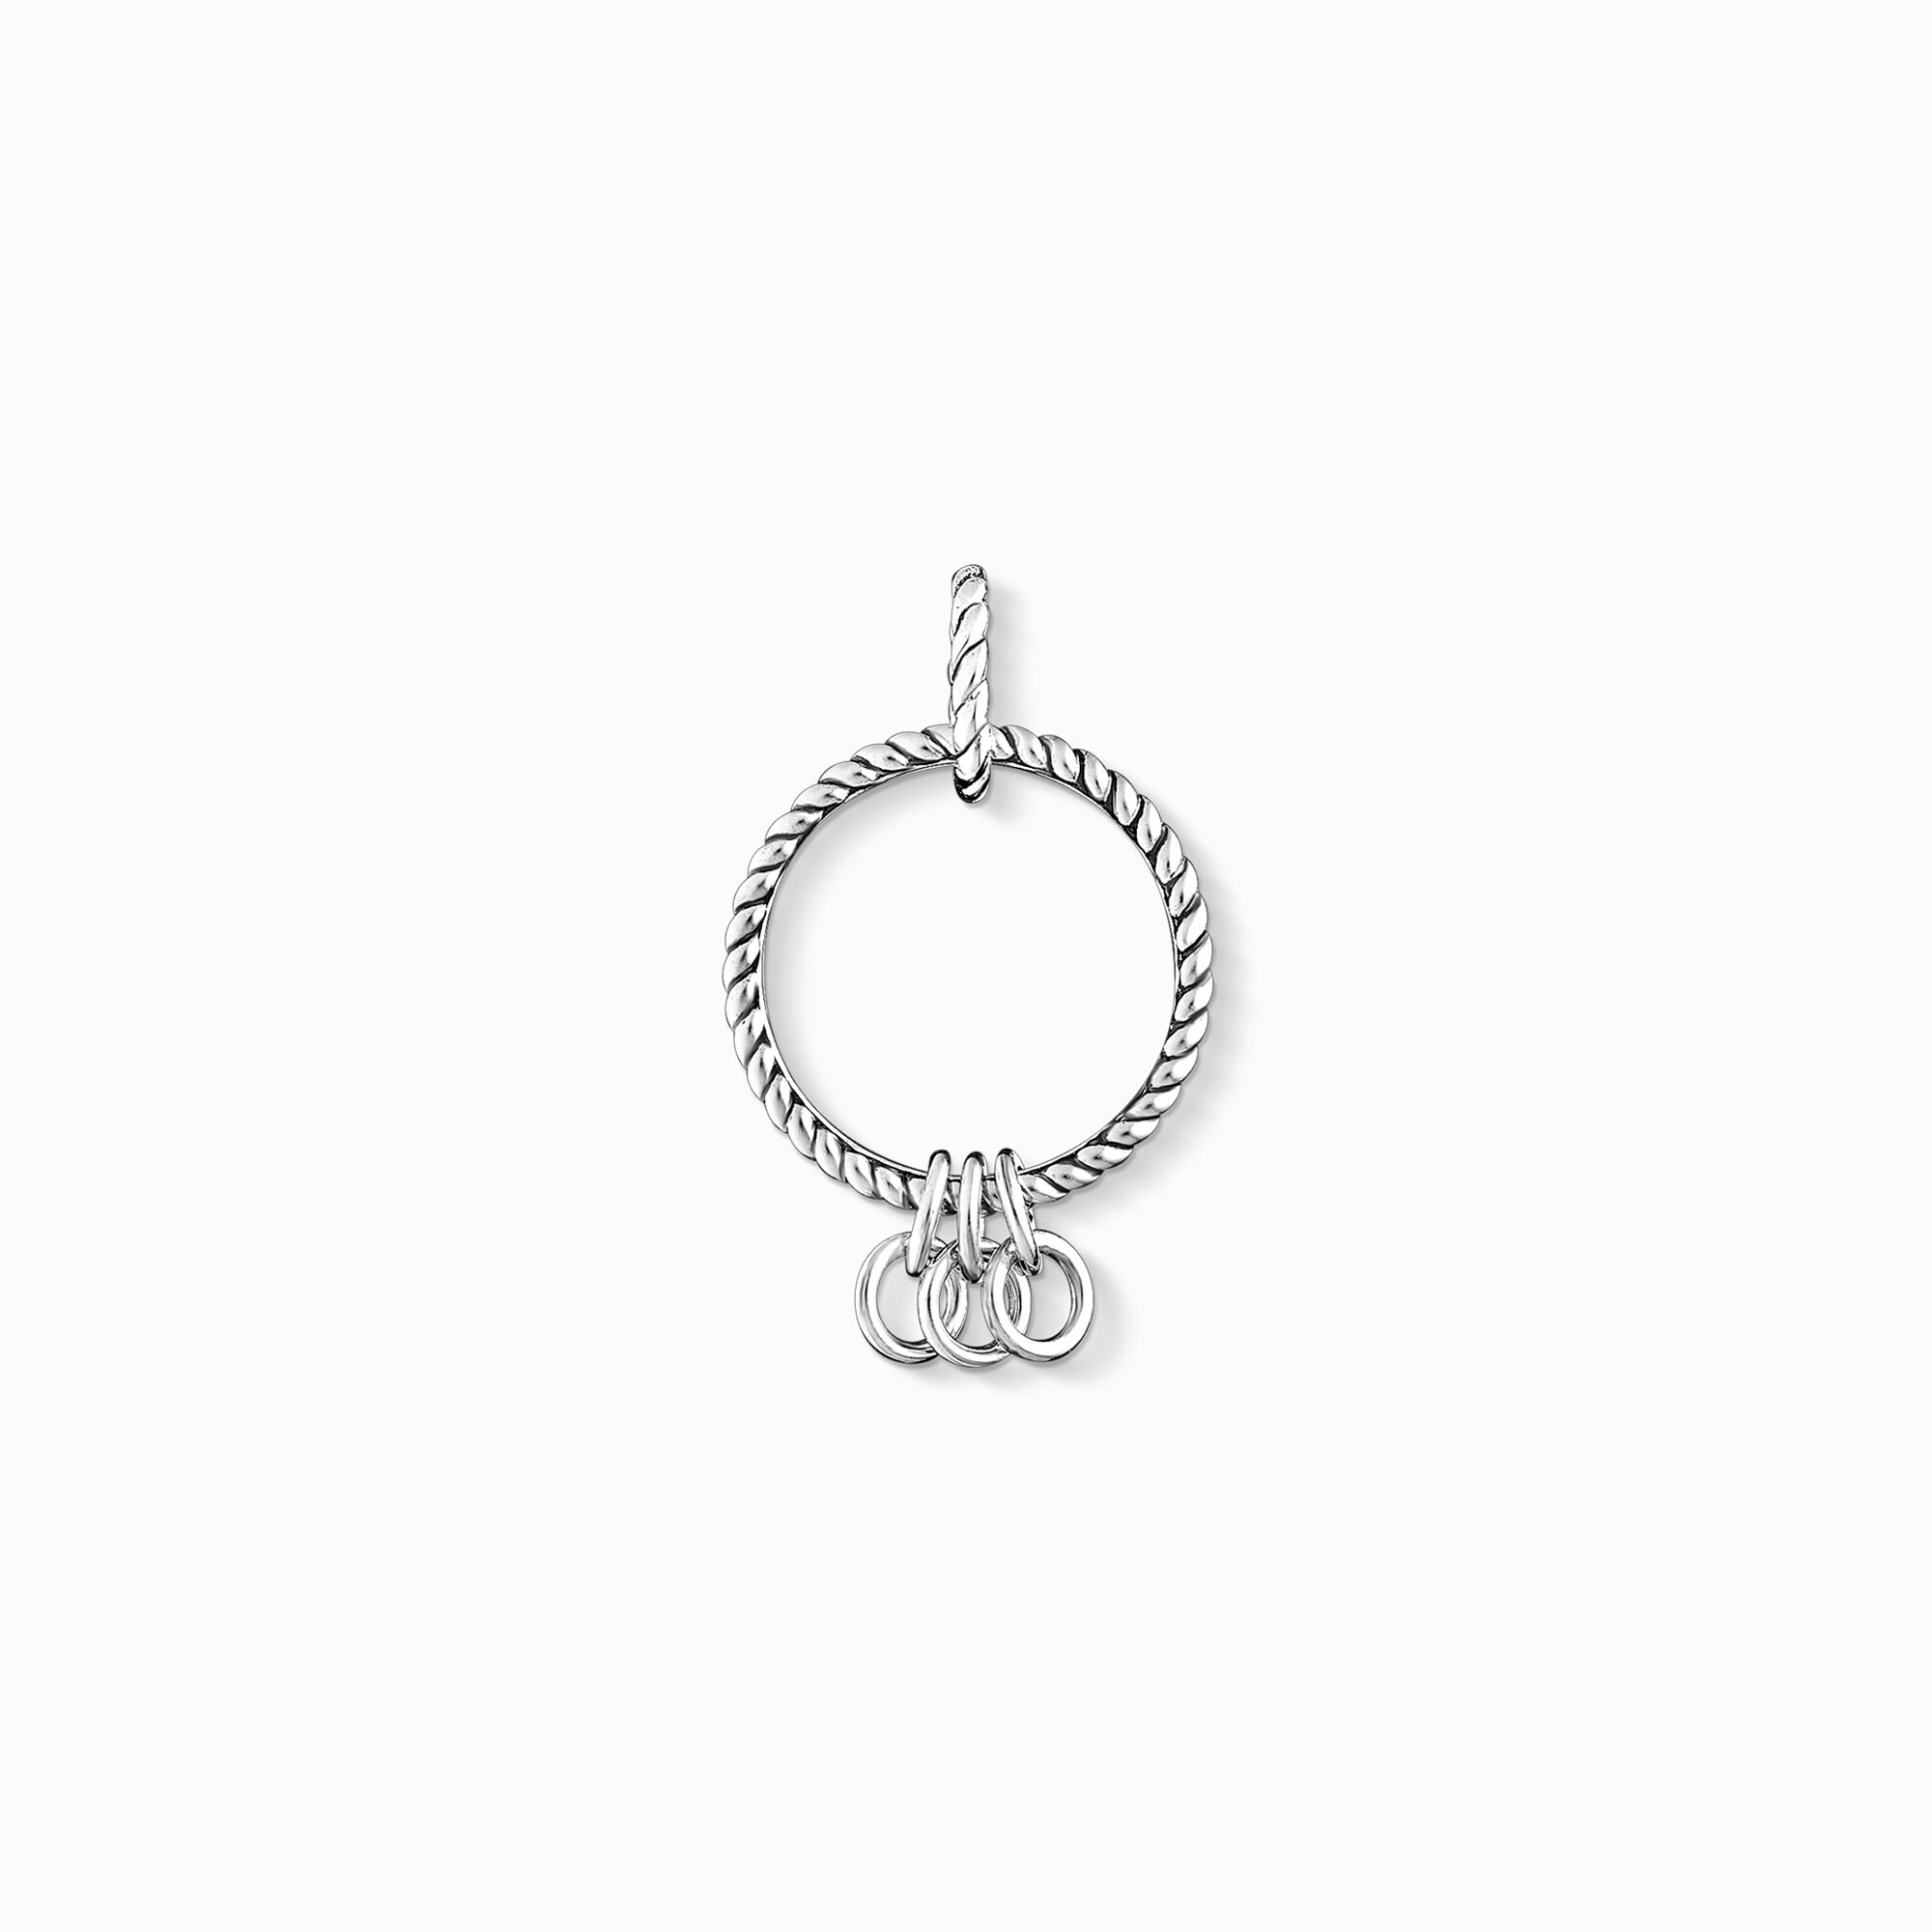 carrier from the Charm Club collection in the THOMAS SABO online store